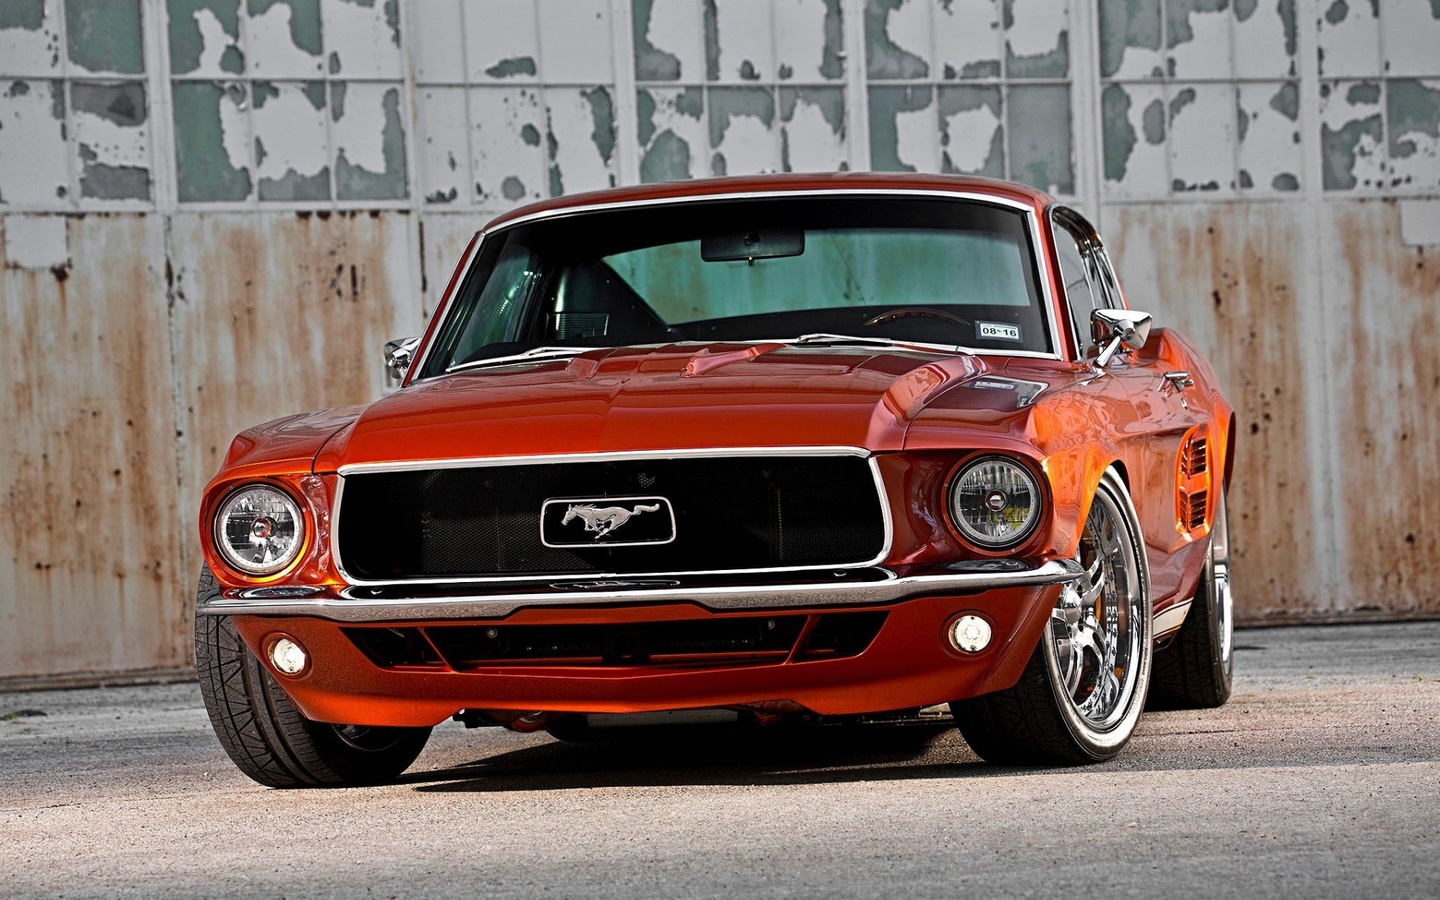 american, classic, car, ford, mustang